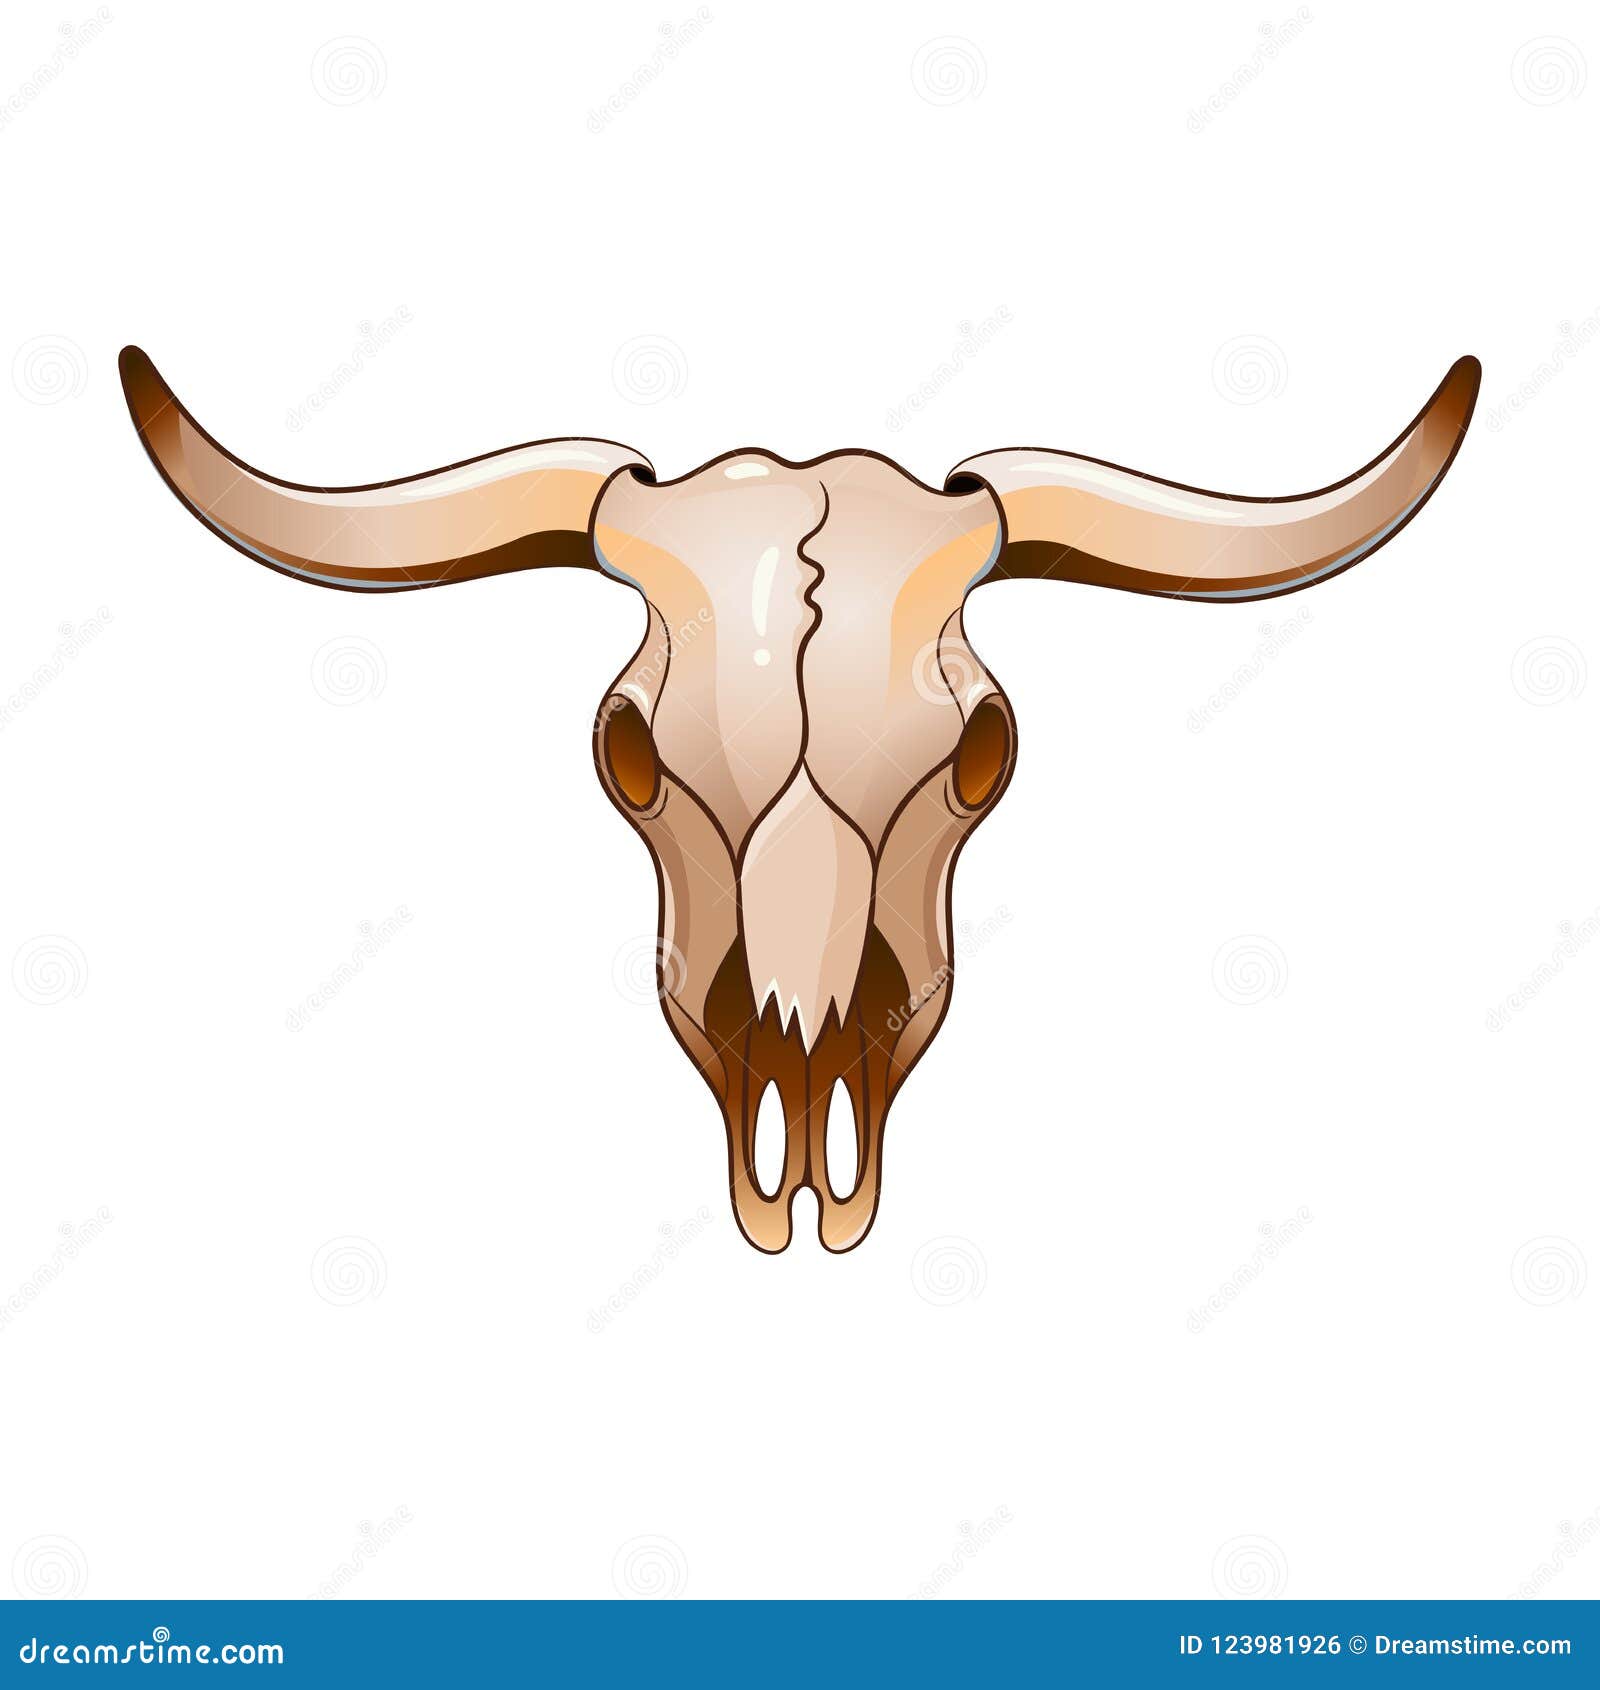 2,219 Cow skull Vector Images | Depositphotos